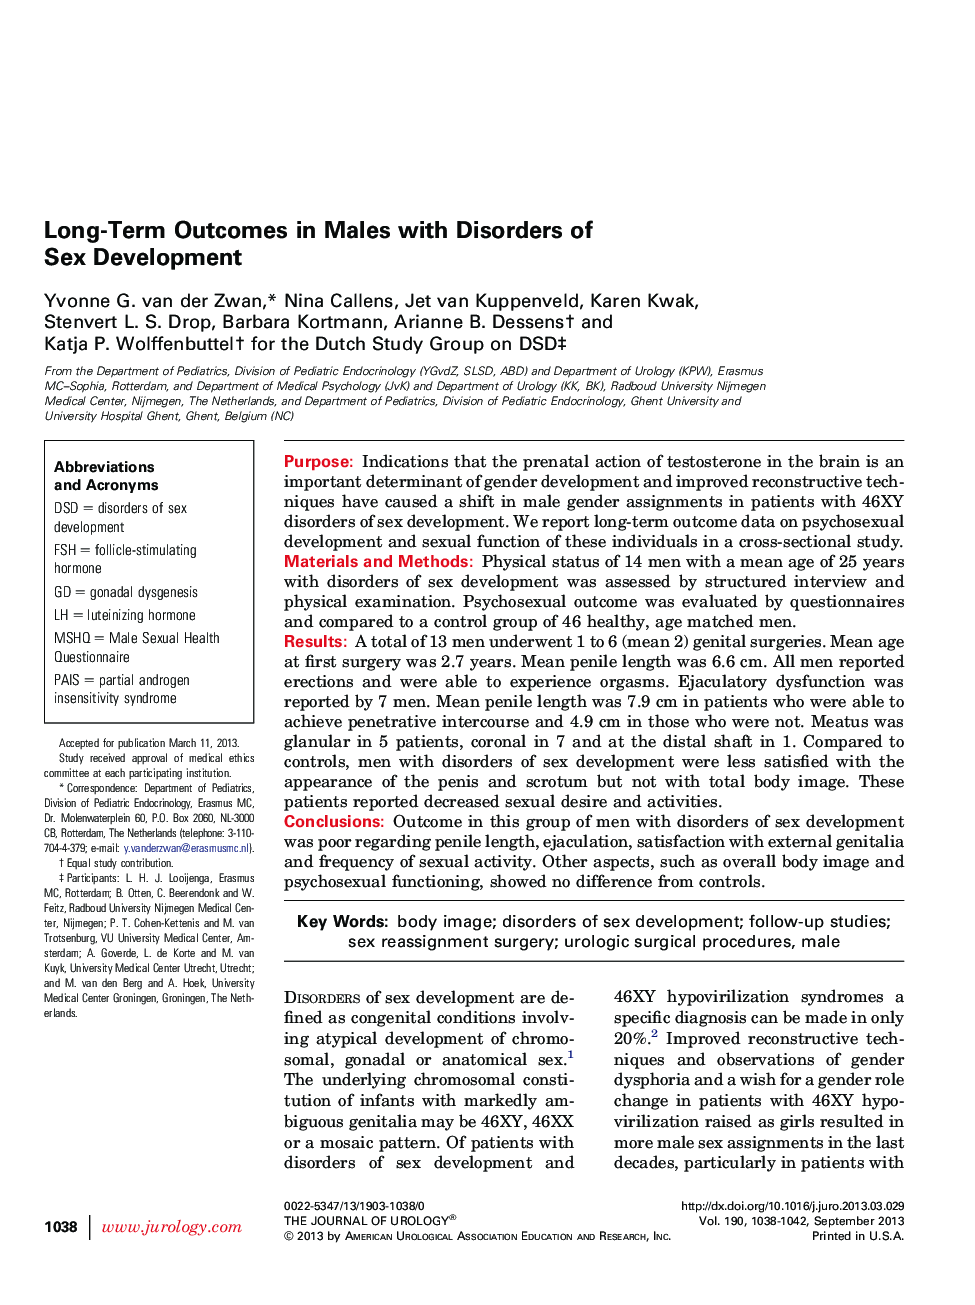 Long-Term Outcomes in Males with Disorders of Sex Development 